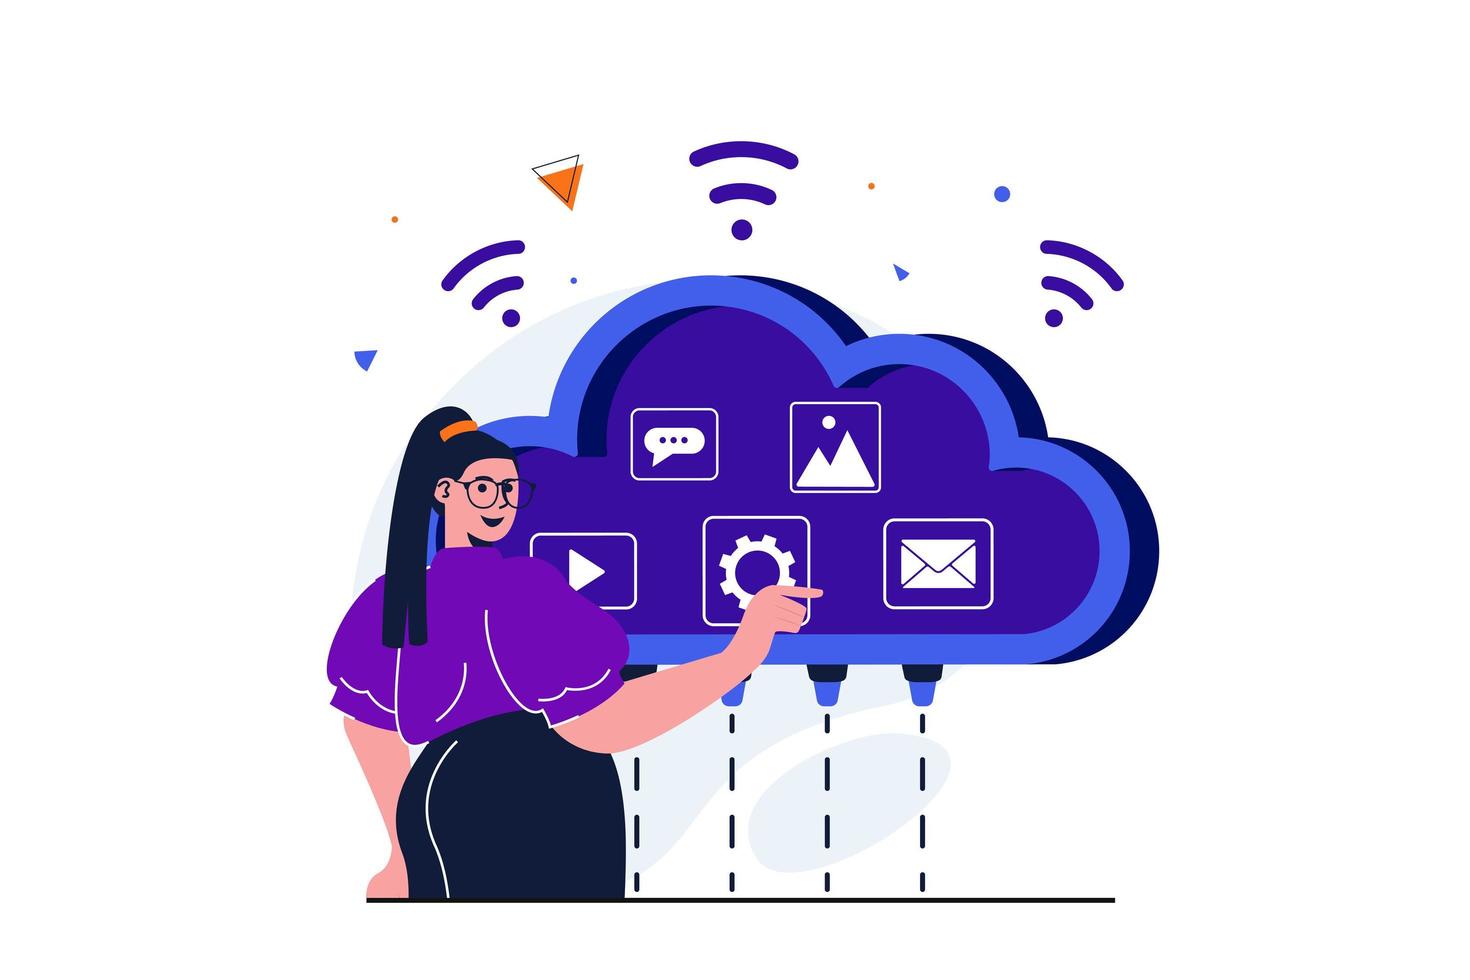 Cloud computing modern flat concept for web banner design. Woman stores data, videos, pictures, online correspondence and emails in secure cloud storage. Vector illustration with isolated people scene